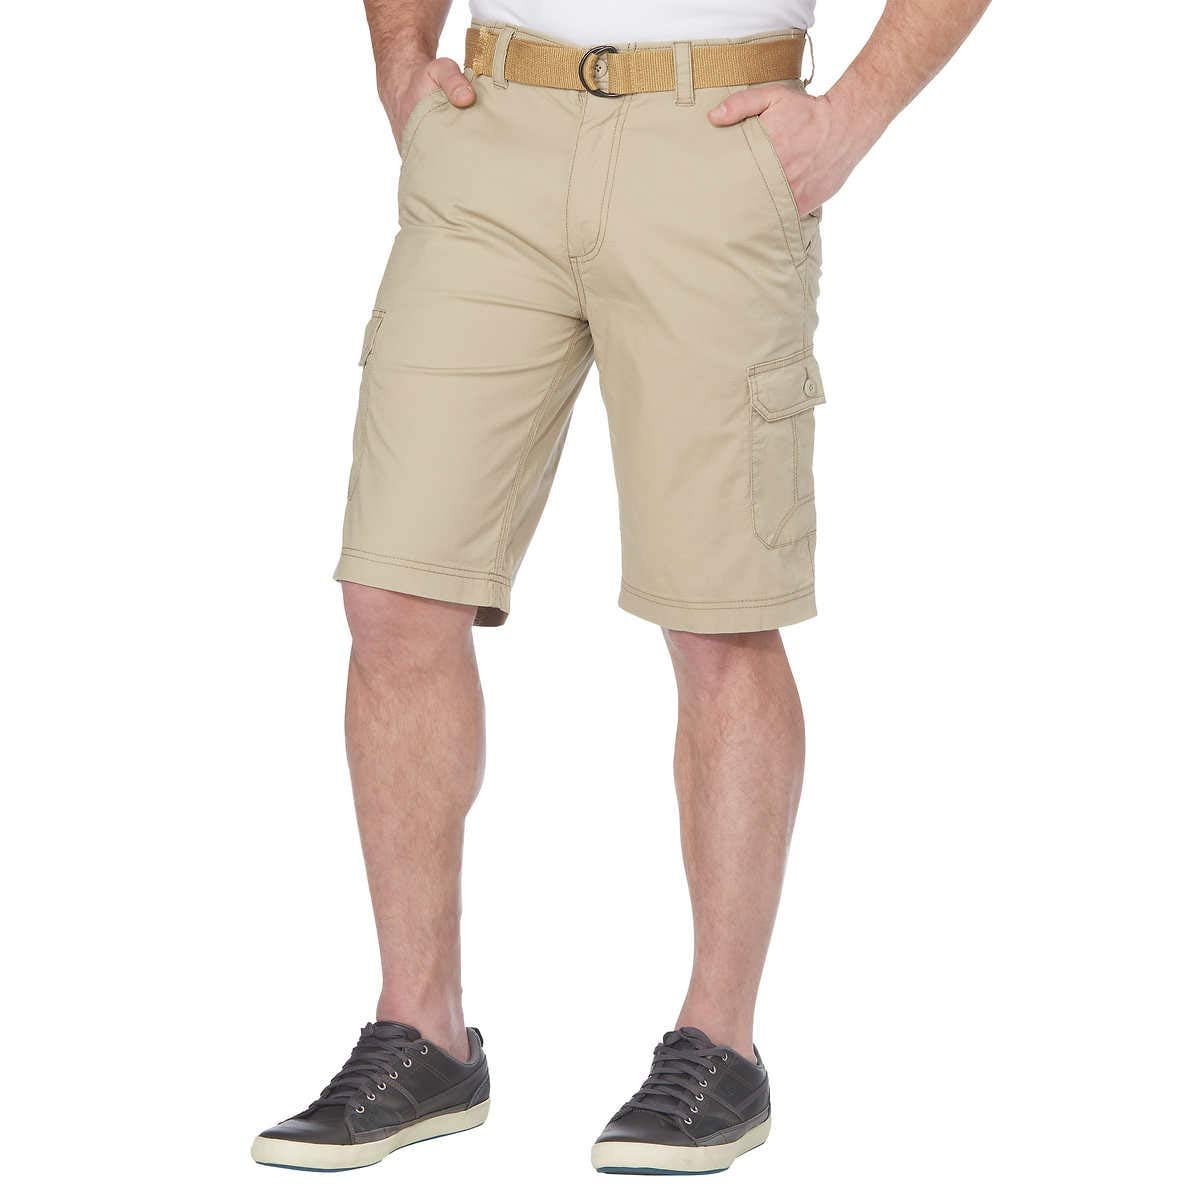 MEN'S SIZE 30 WEAR FIRST BRAND TAN/BROWN TROPICAL PRINT CARGO SHORTS NEW #1335 